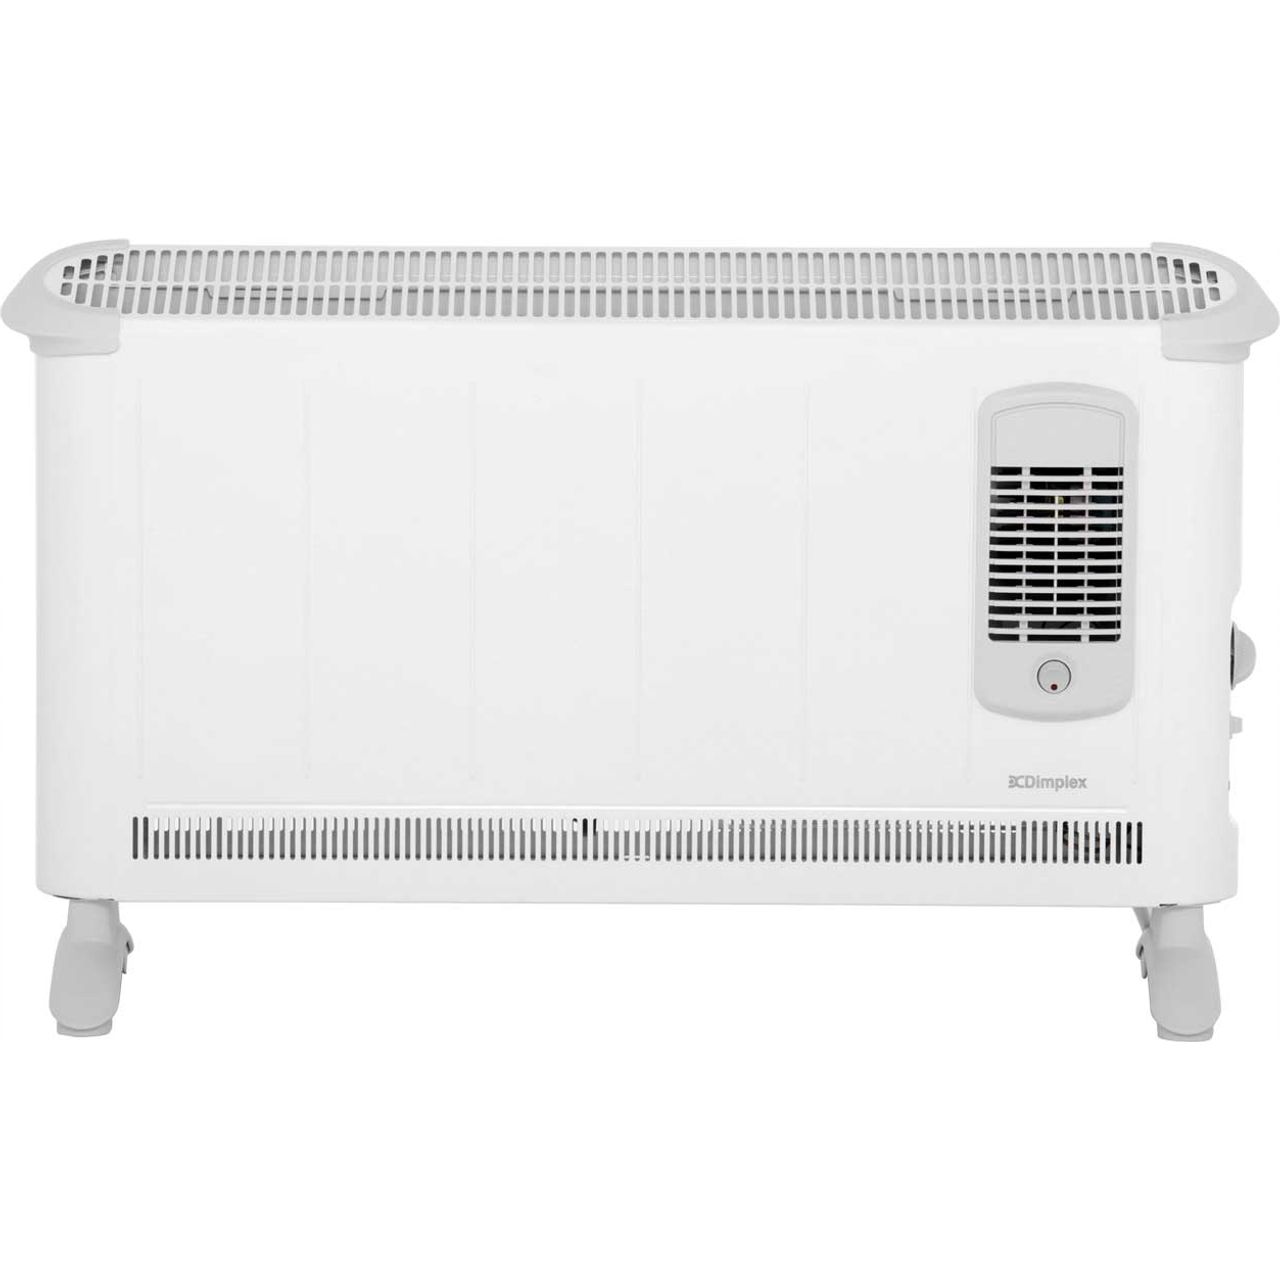 Dimplex 403TSF Convector Heater 3000W Review